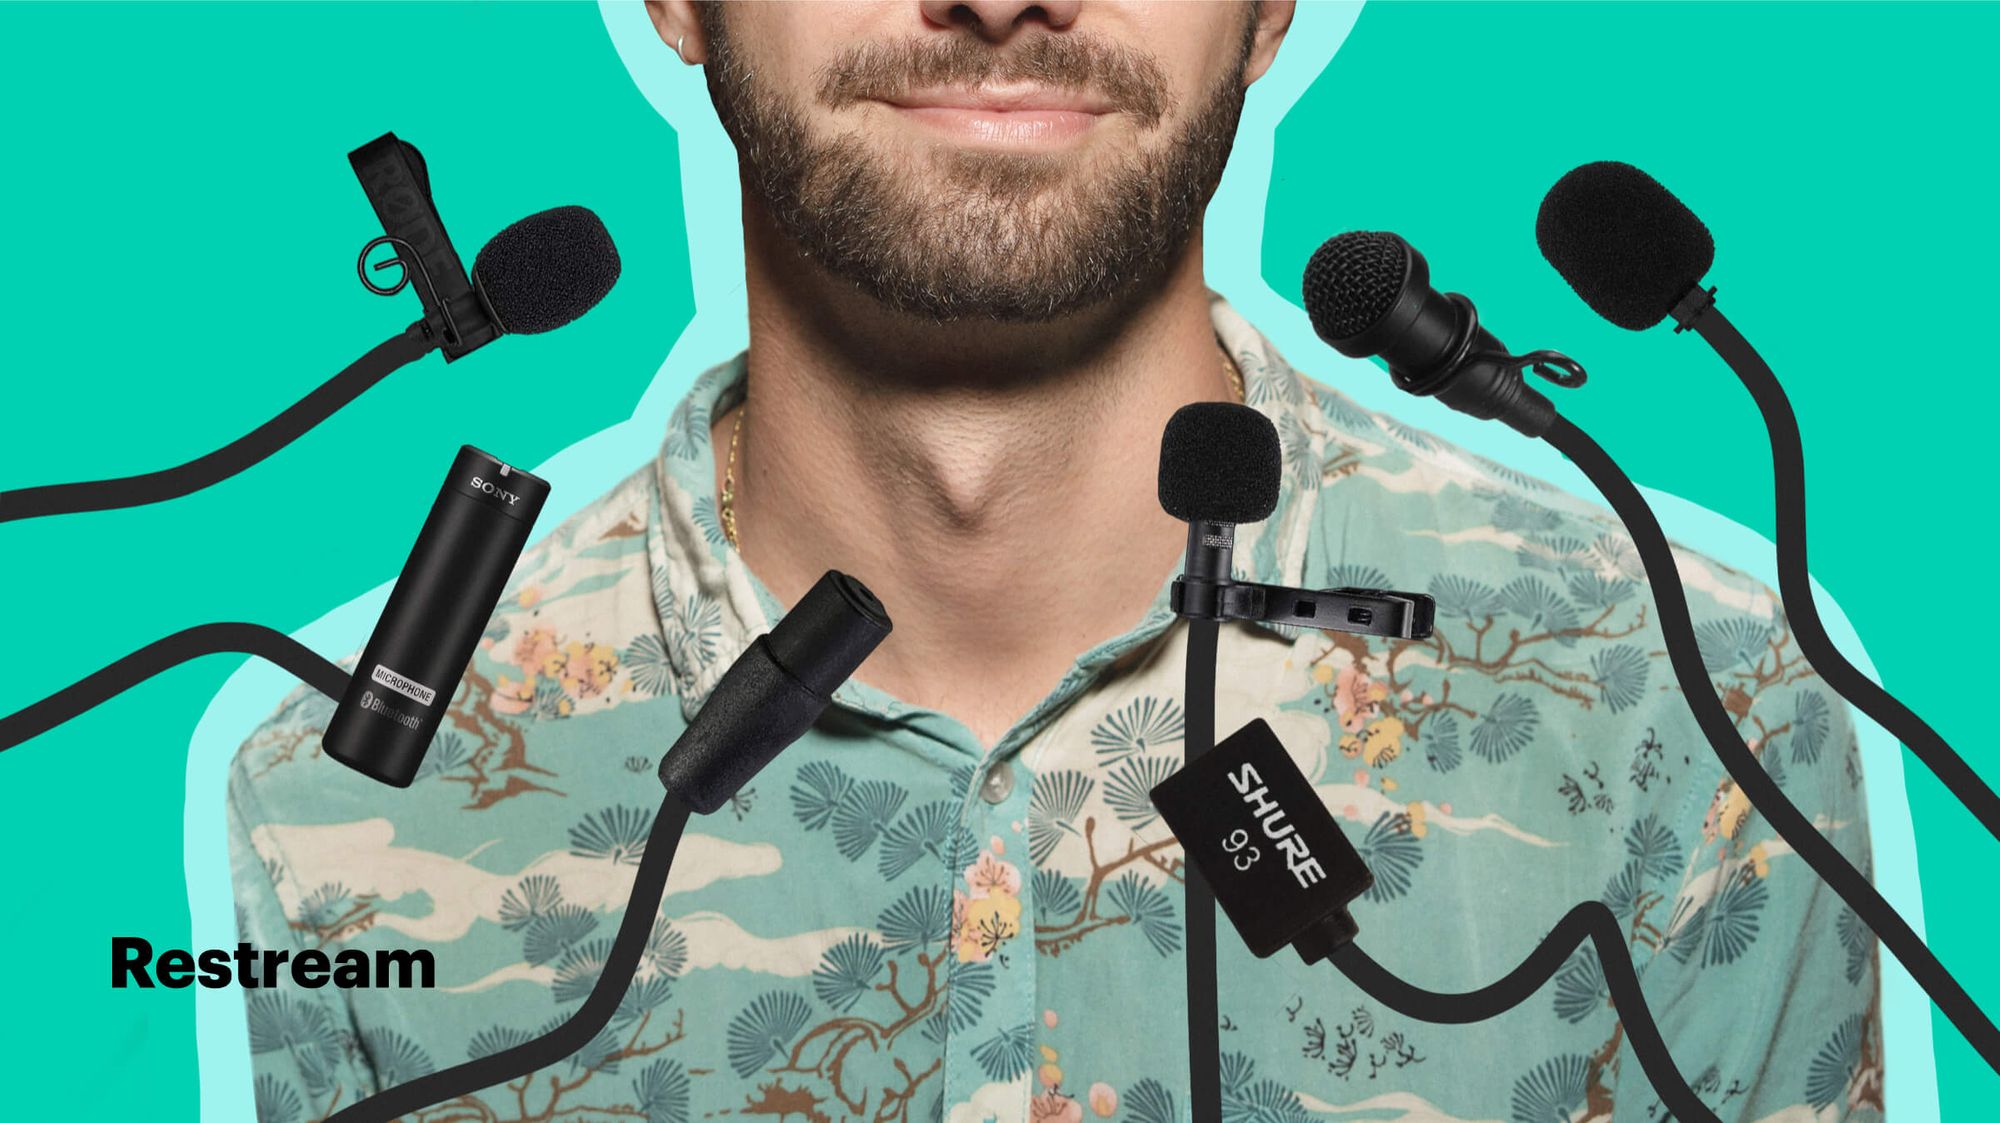 Top 7 Lavalier Microphones for Streaming